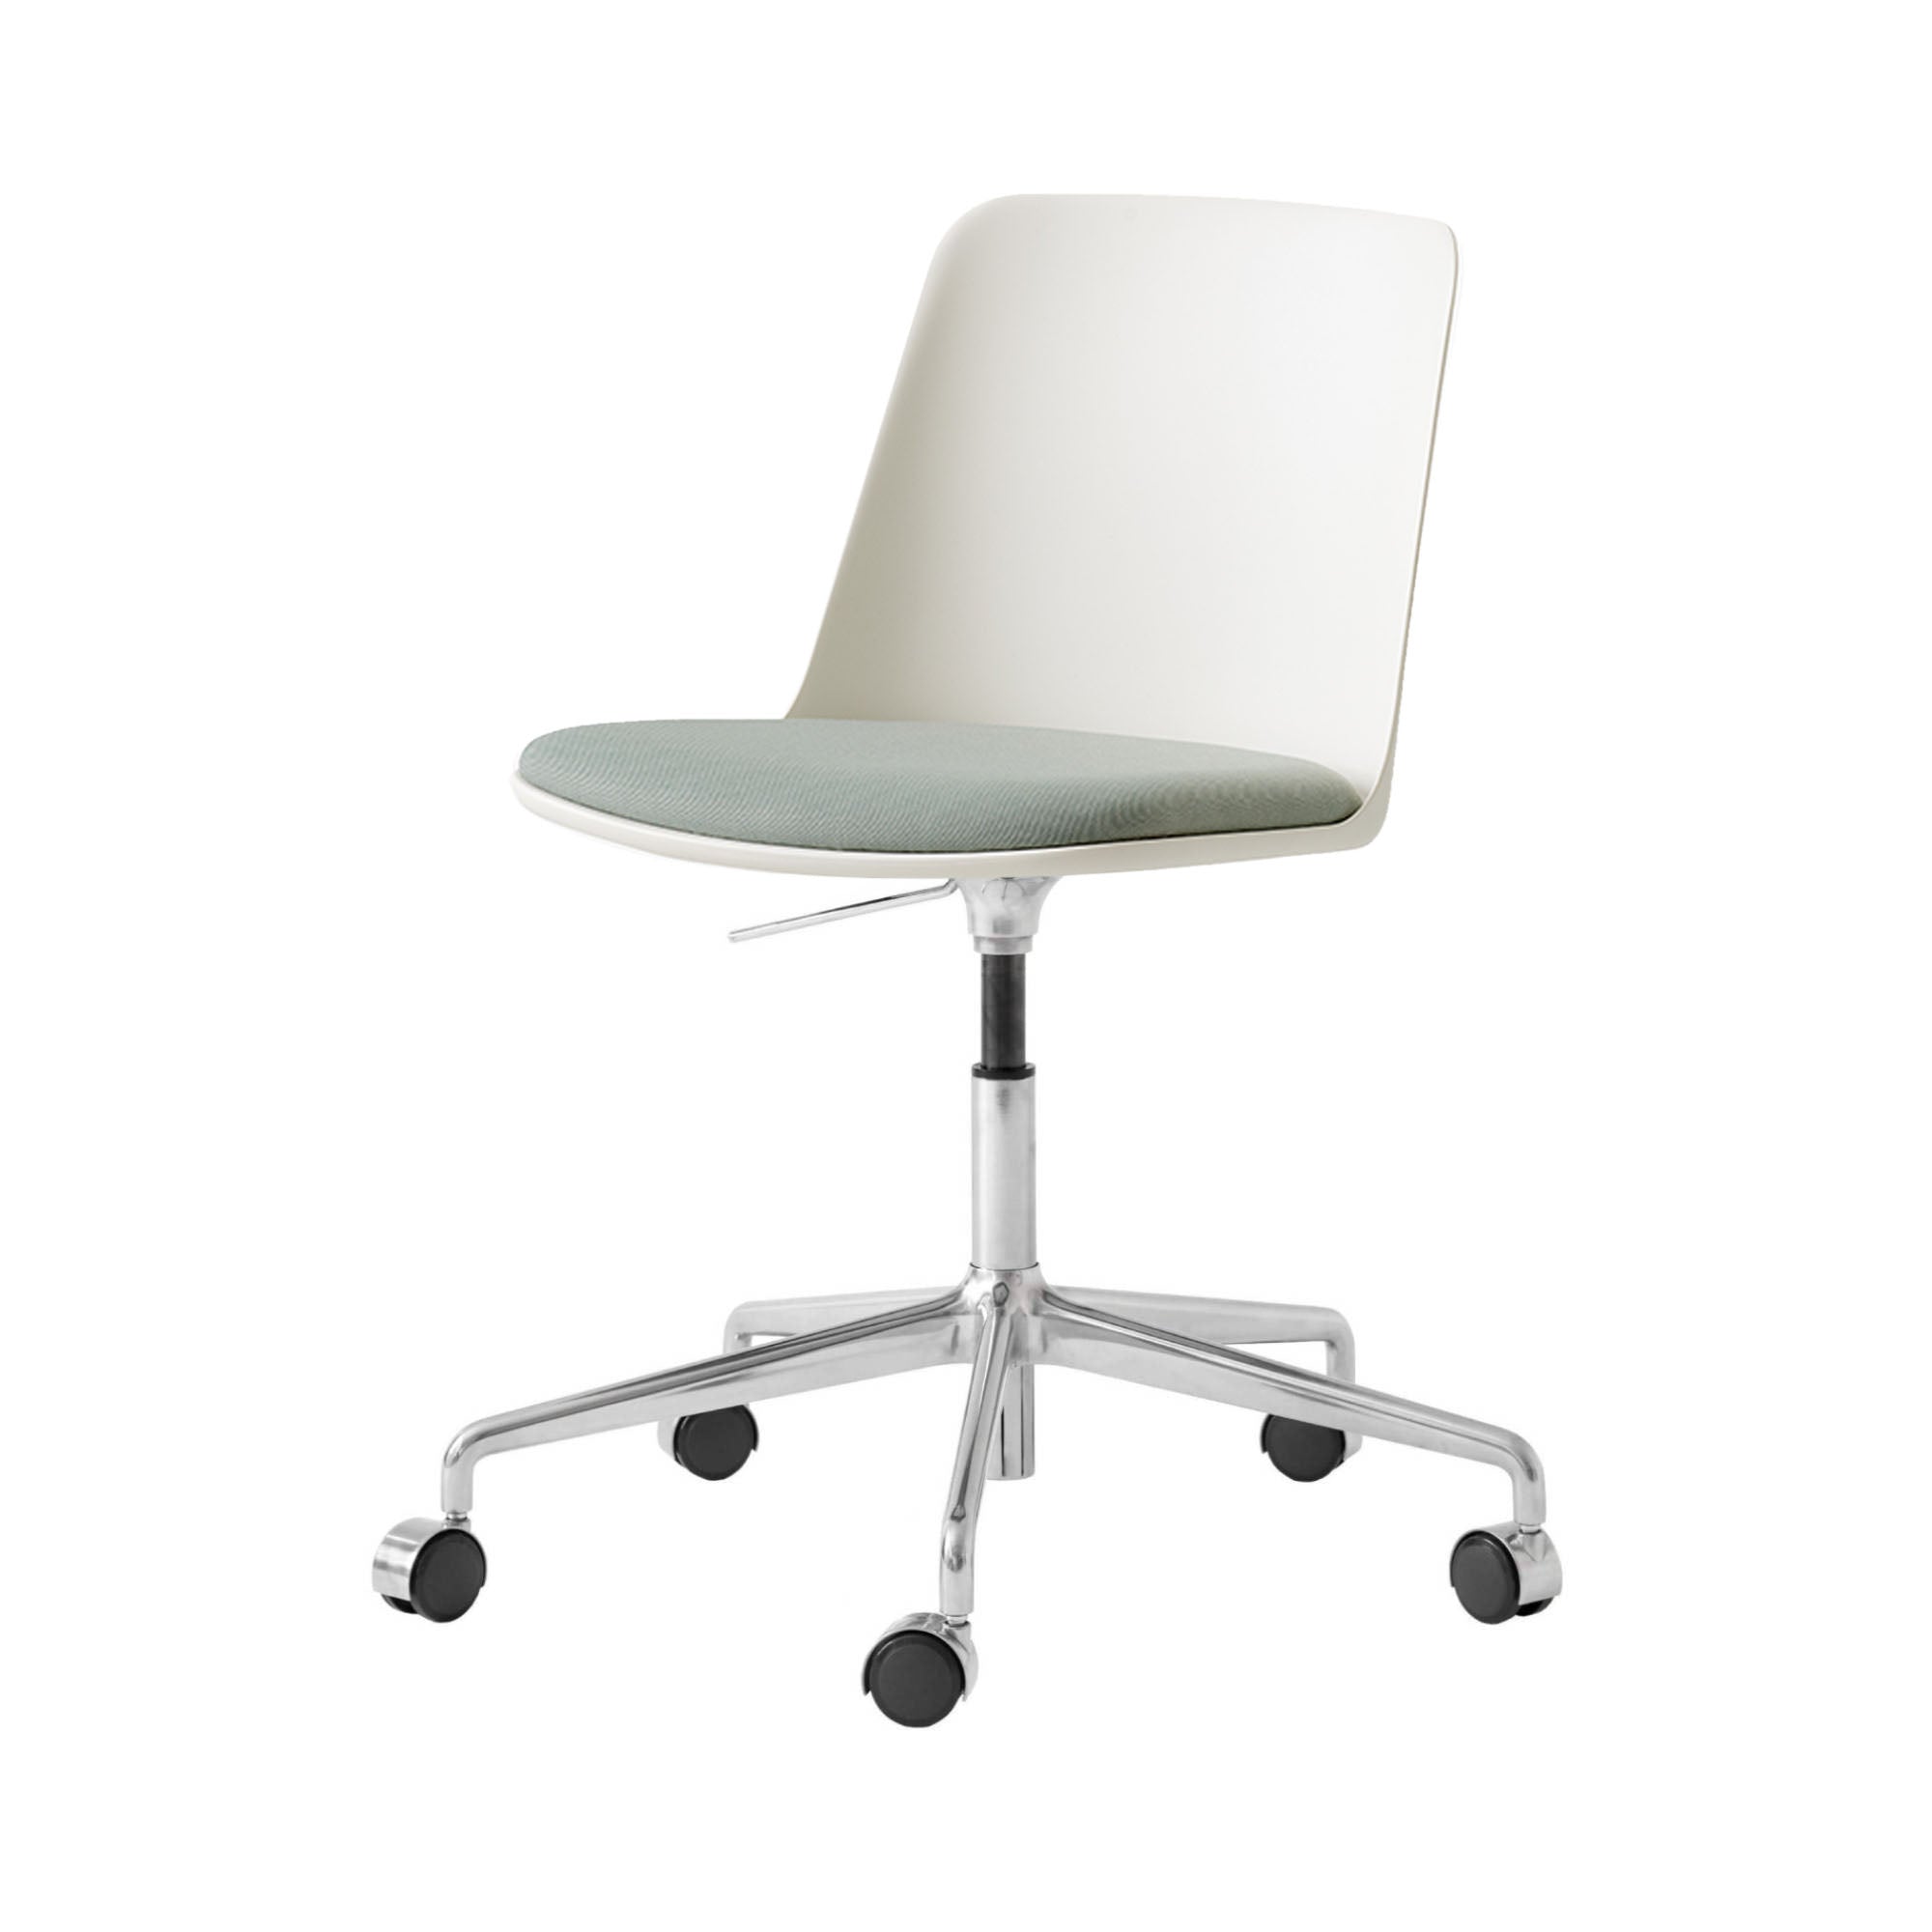 Rely Chair HW29: White + Polished Aluminum